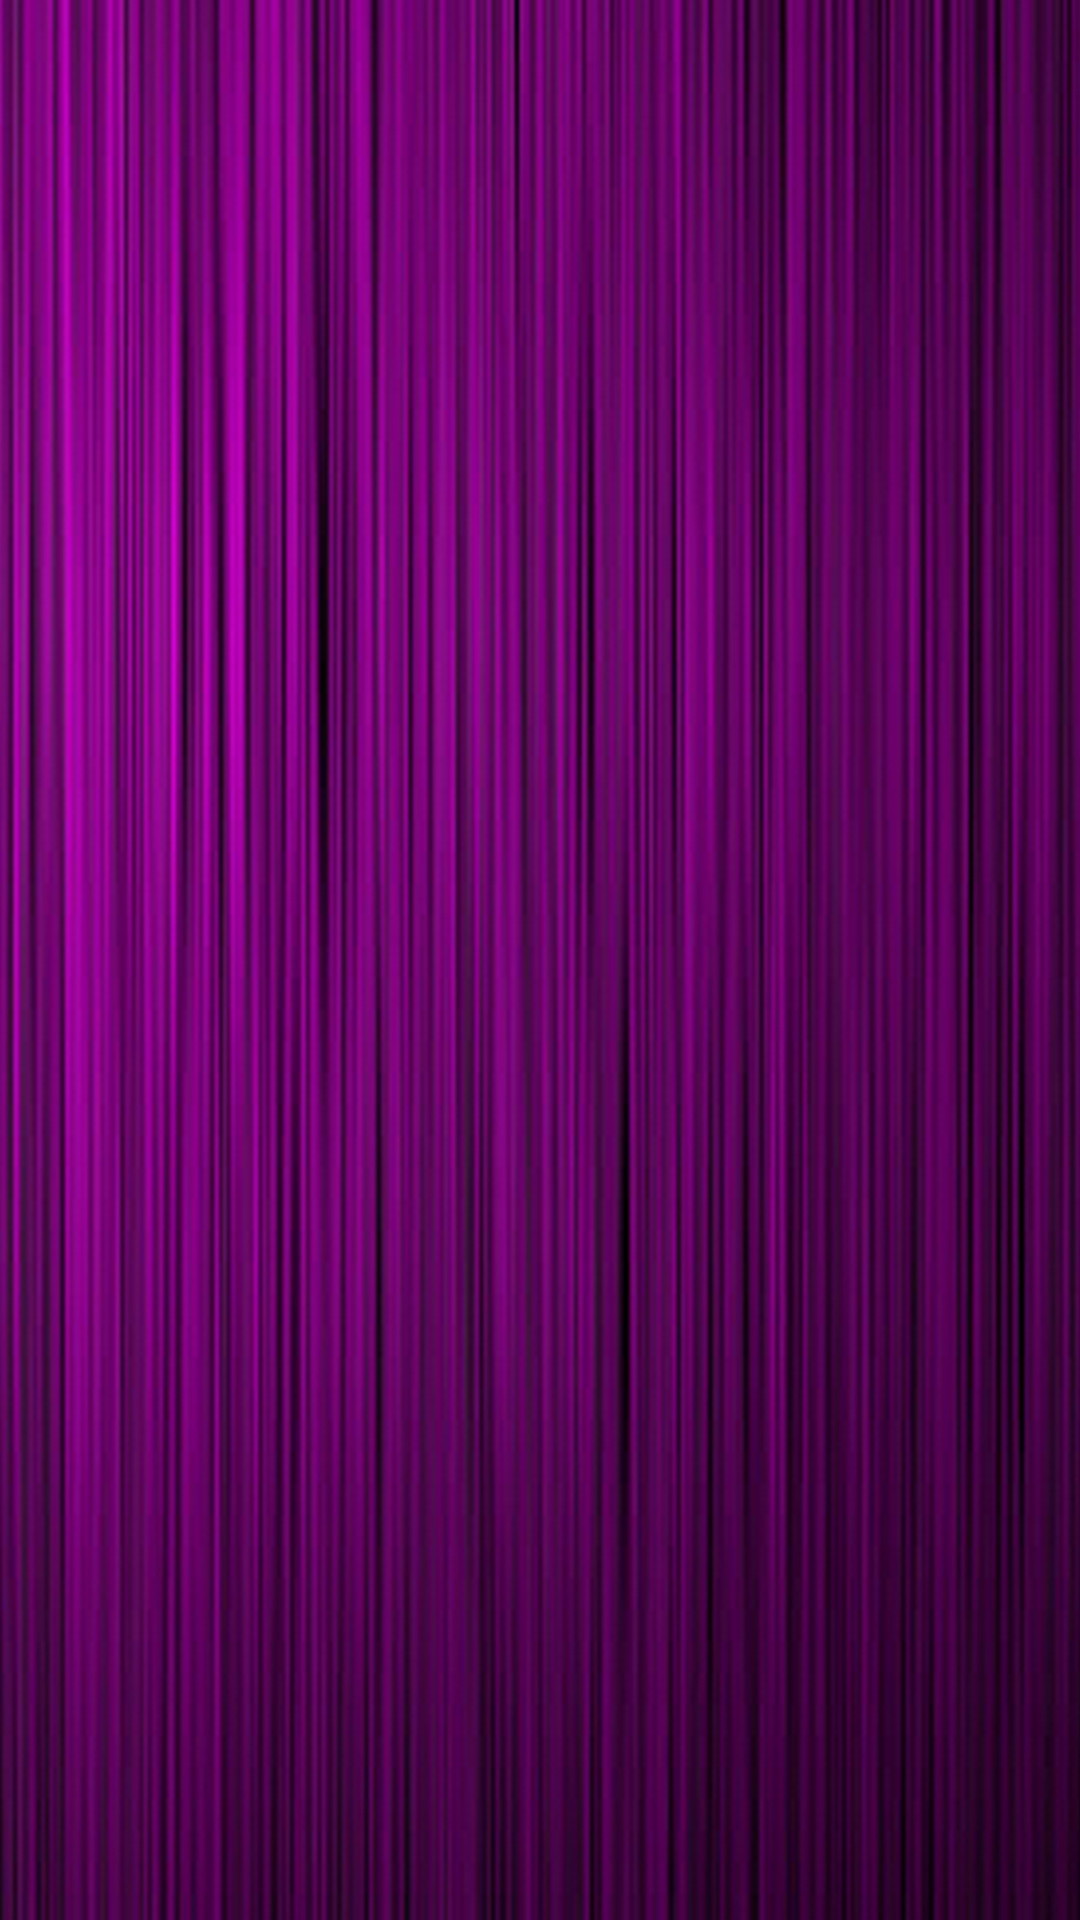 Cool Purple Wallpaper Android with high-resolution 1080x1920 pixel. You can use this wallpaper for your Android backgrounds, Tablet, Samsung Screensavers, Mobile Phone Lock Screen and another Smartphones device